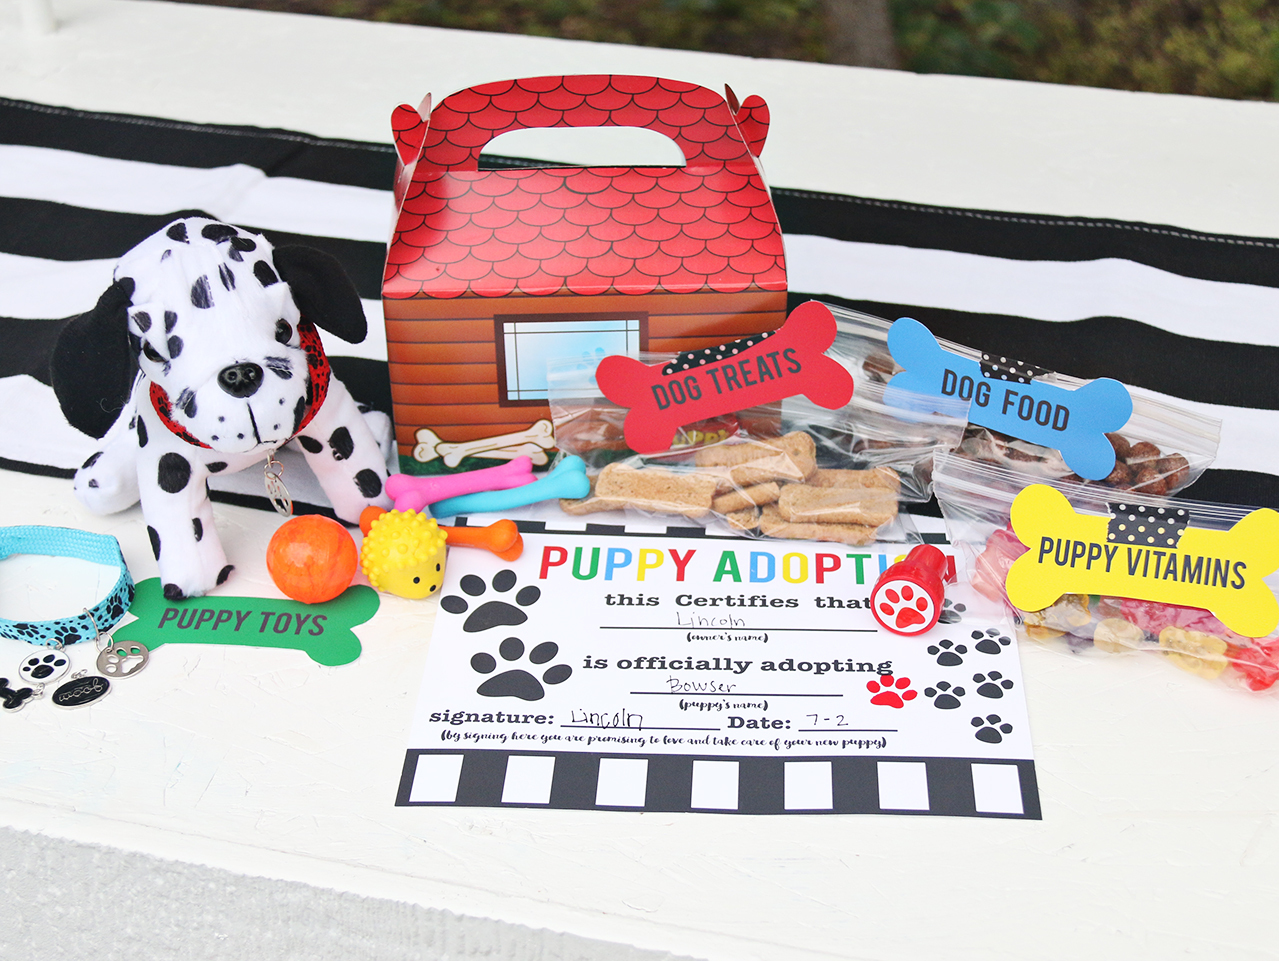 Two Complete Sets of 12 24 Pieces Adopt a Puppy Figures Series 4 